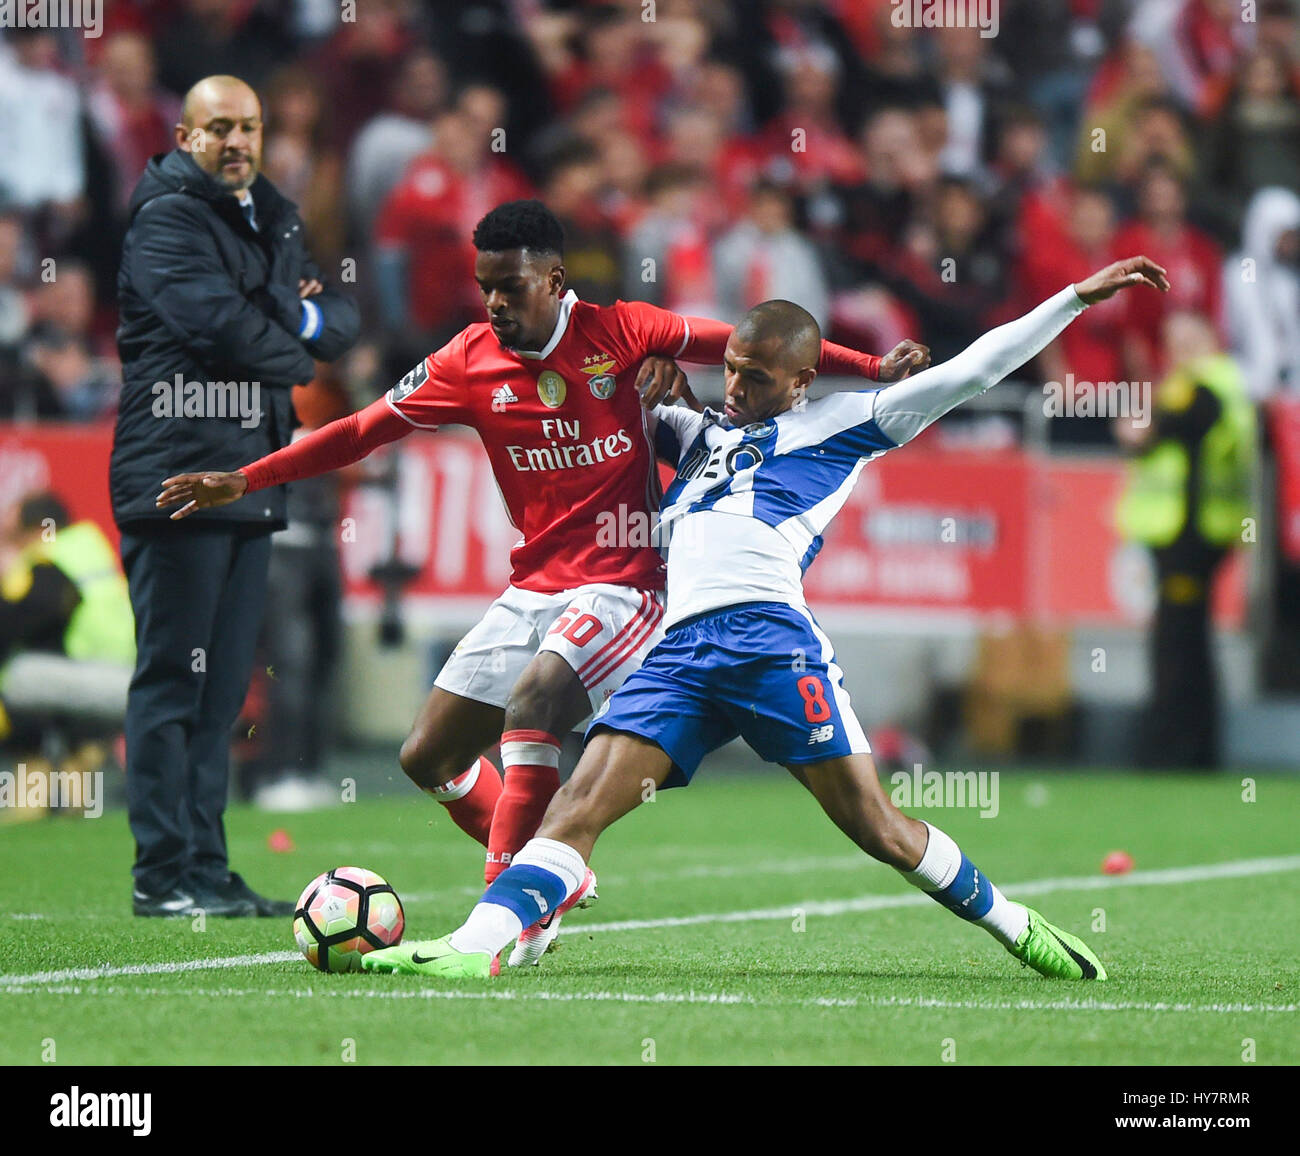 Lisbon, Portugal. 1st Apr, 2017. Benfica's Nelson Semedo (front L) vies with Porto's Yacine Brahimi during the Portuguese League soccer match at Luz stadium in Lisbon, Portugal, April 1, 2017. The match ended 1-1. Credit: Zhang Liyun/Xinhua/Alamy Live News Stock Photo